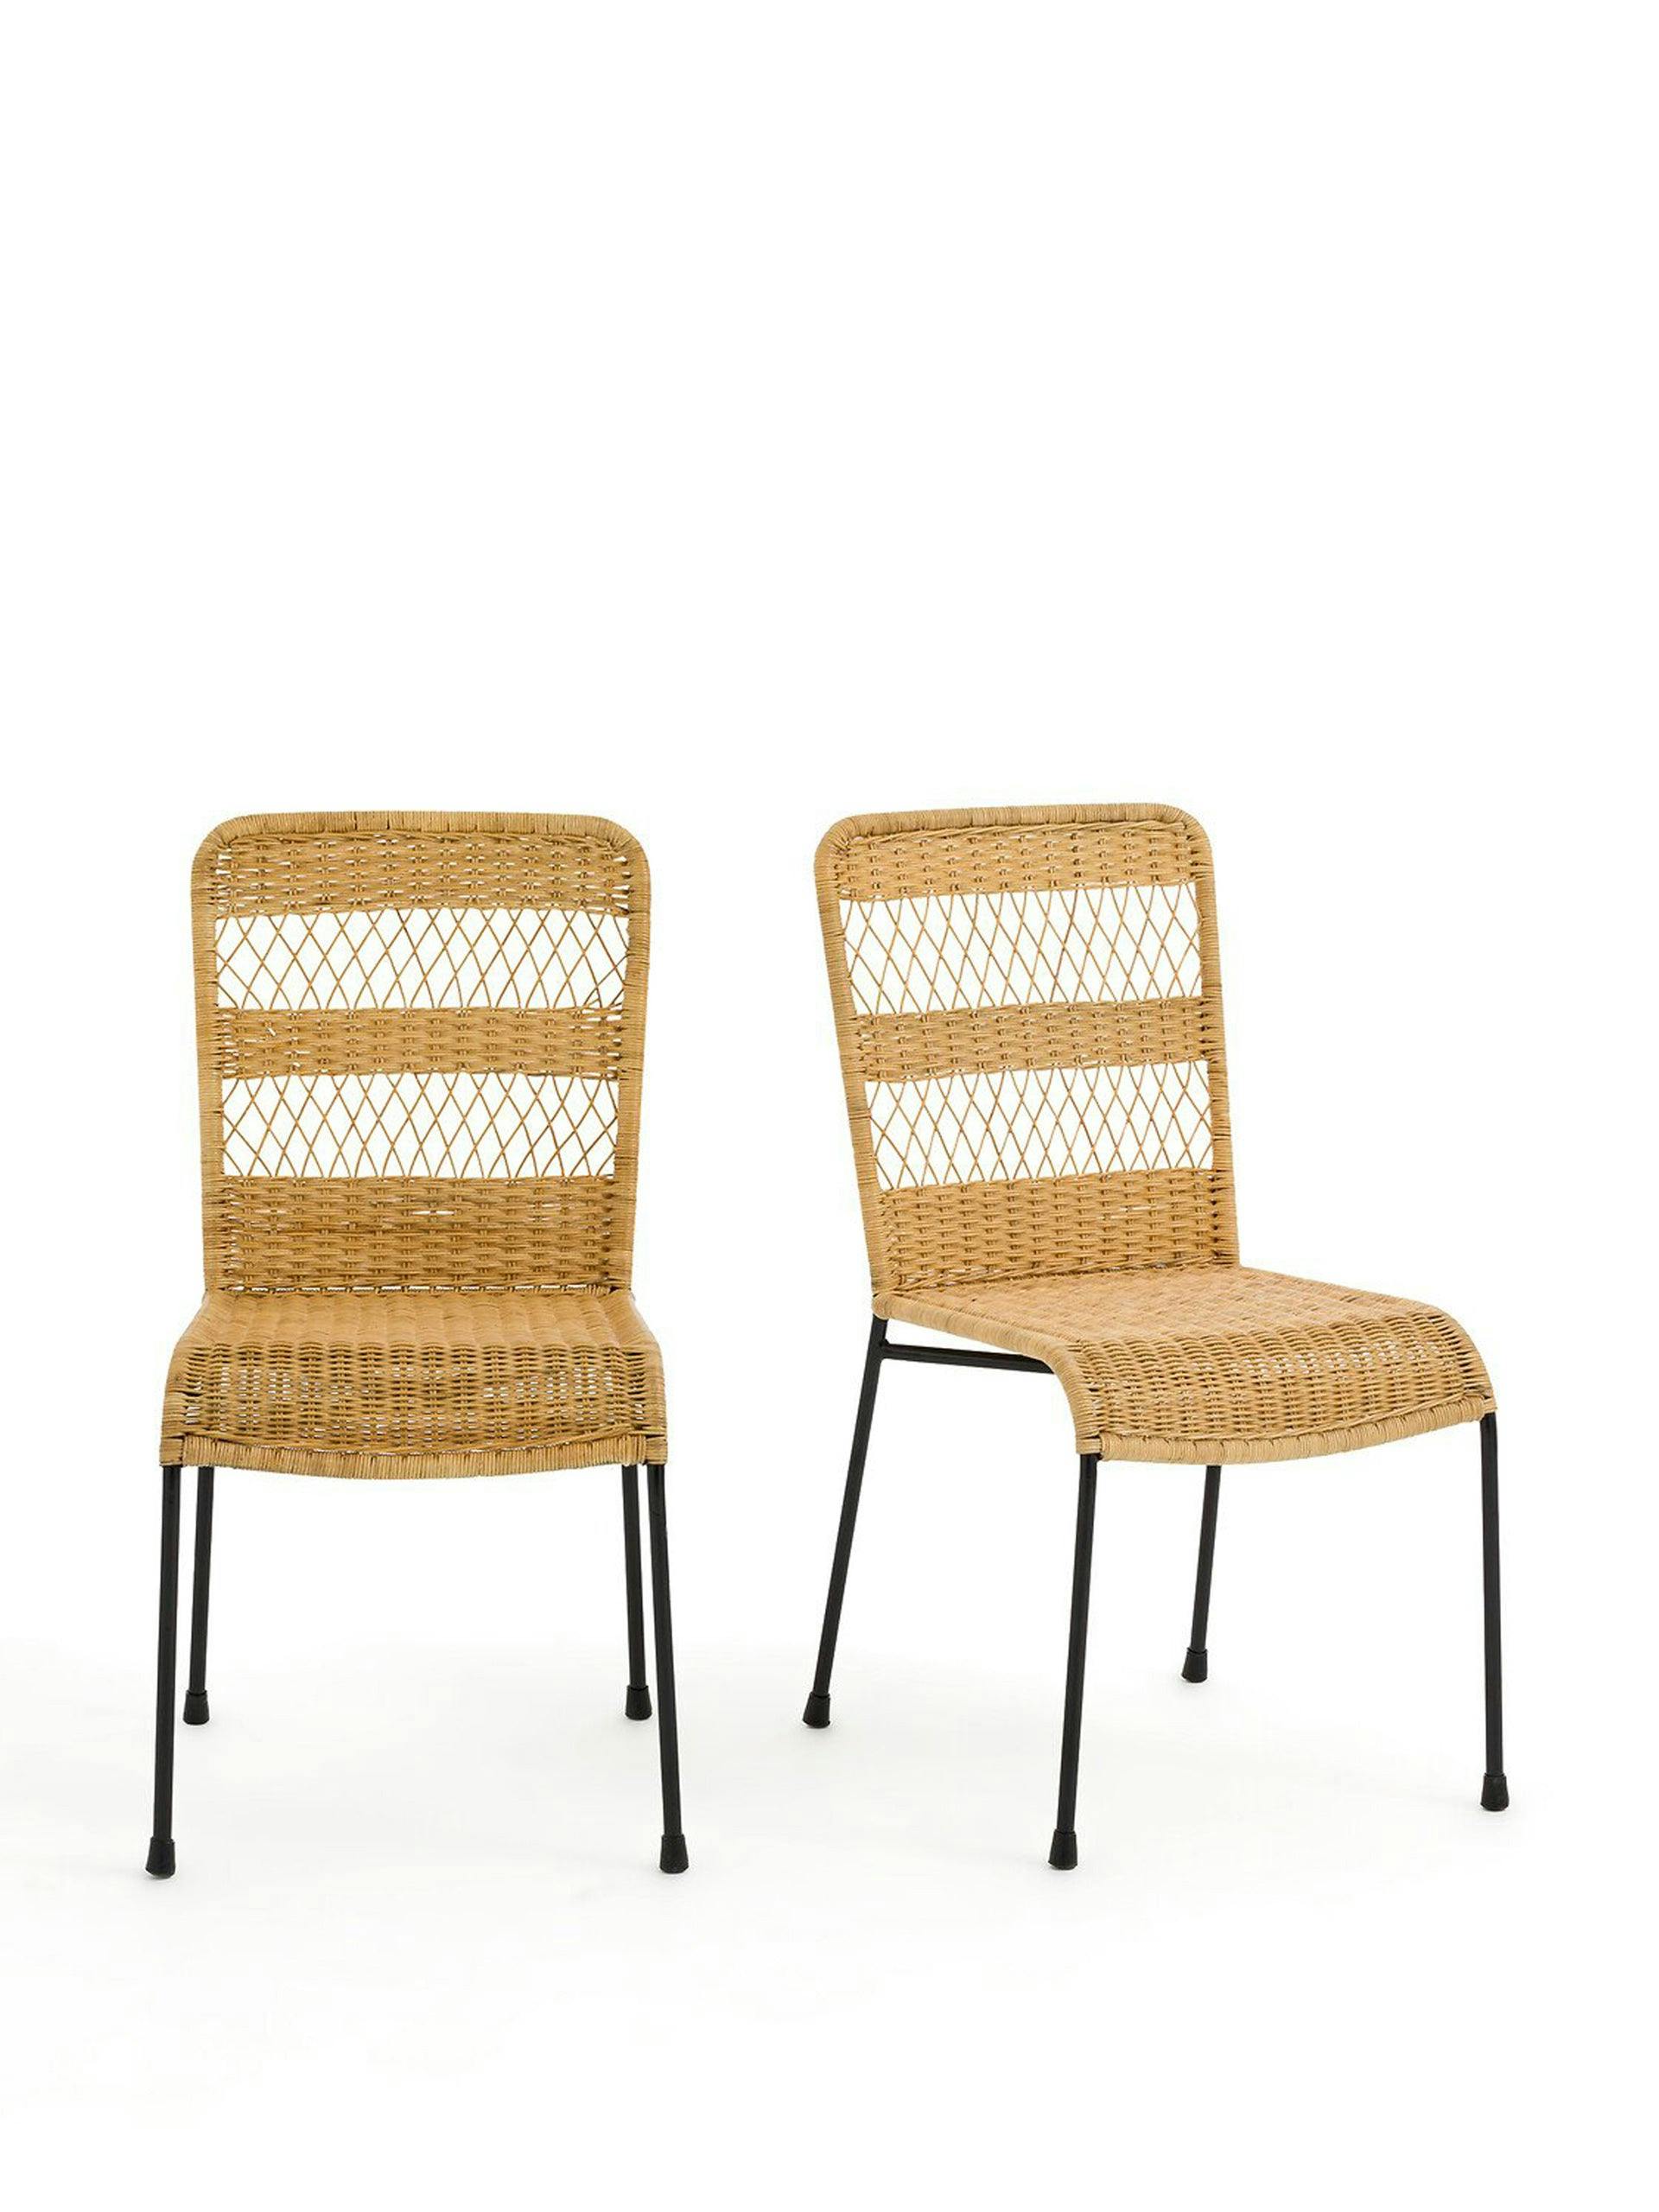 Braided rattan and metal chairs (set of 2)